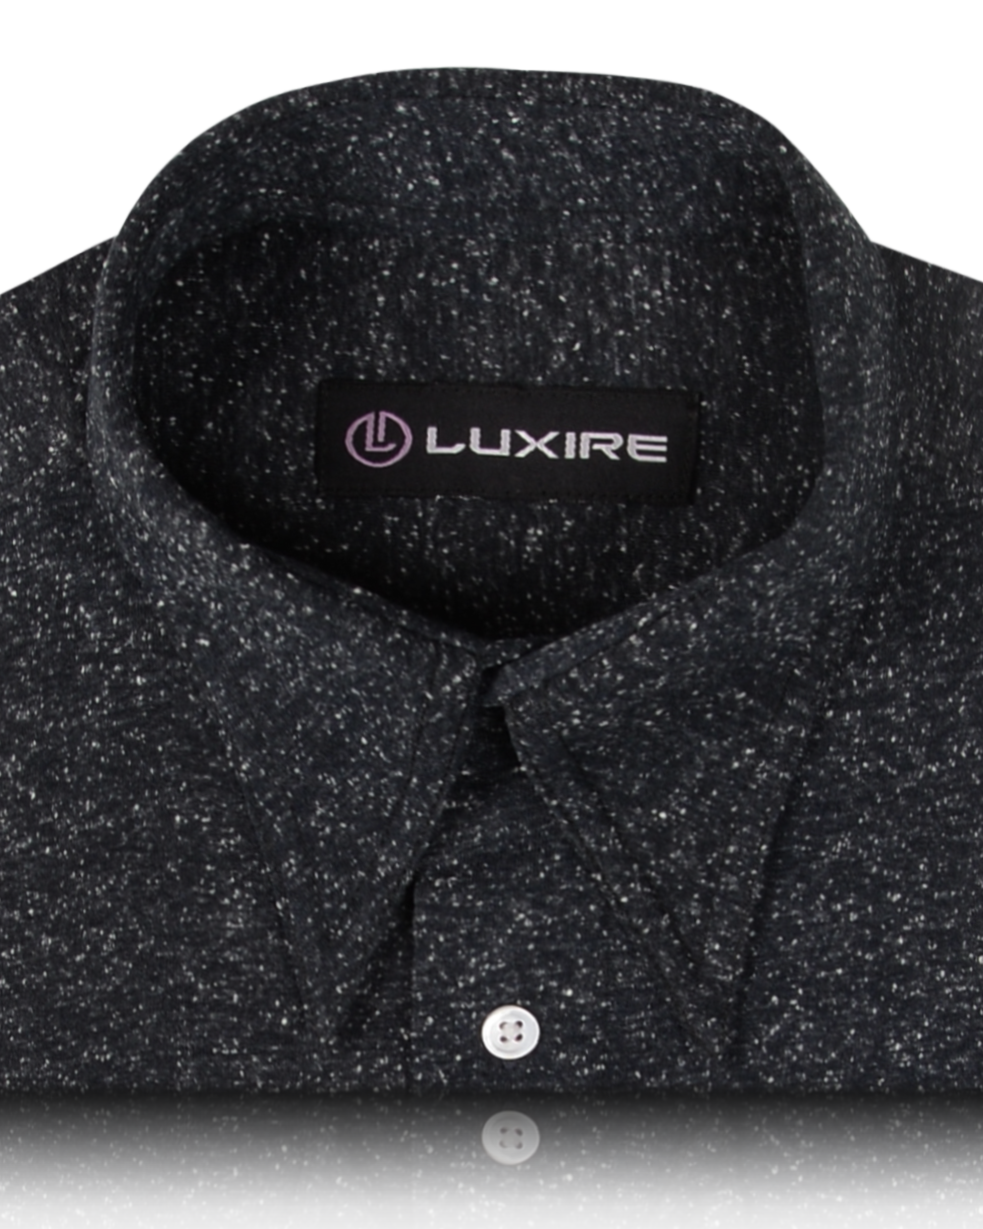 Collar of the custom oxford polo shirt for men by Luxire in speckled grey